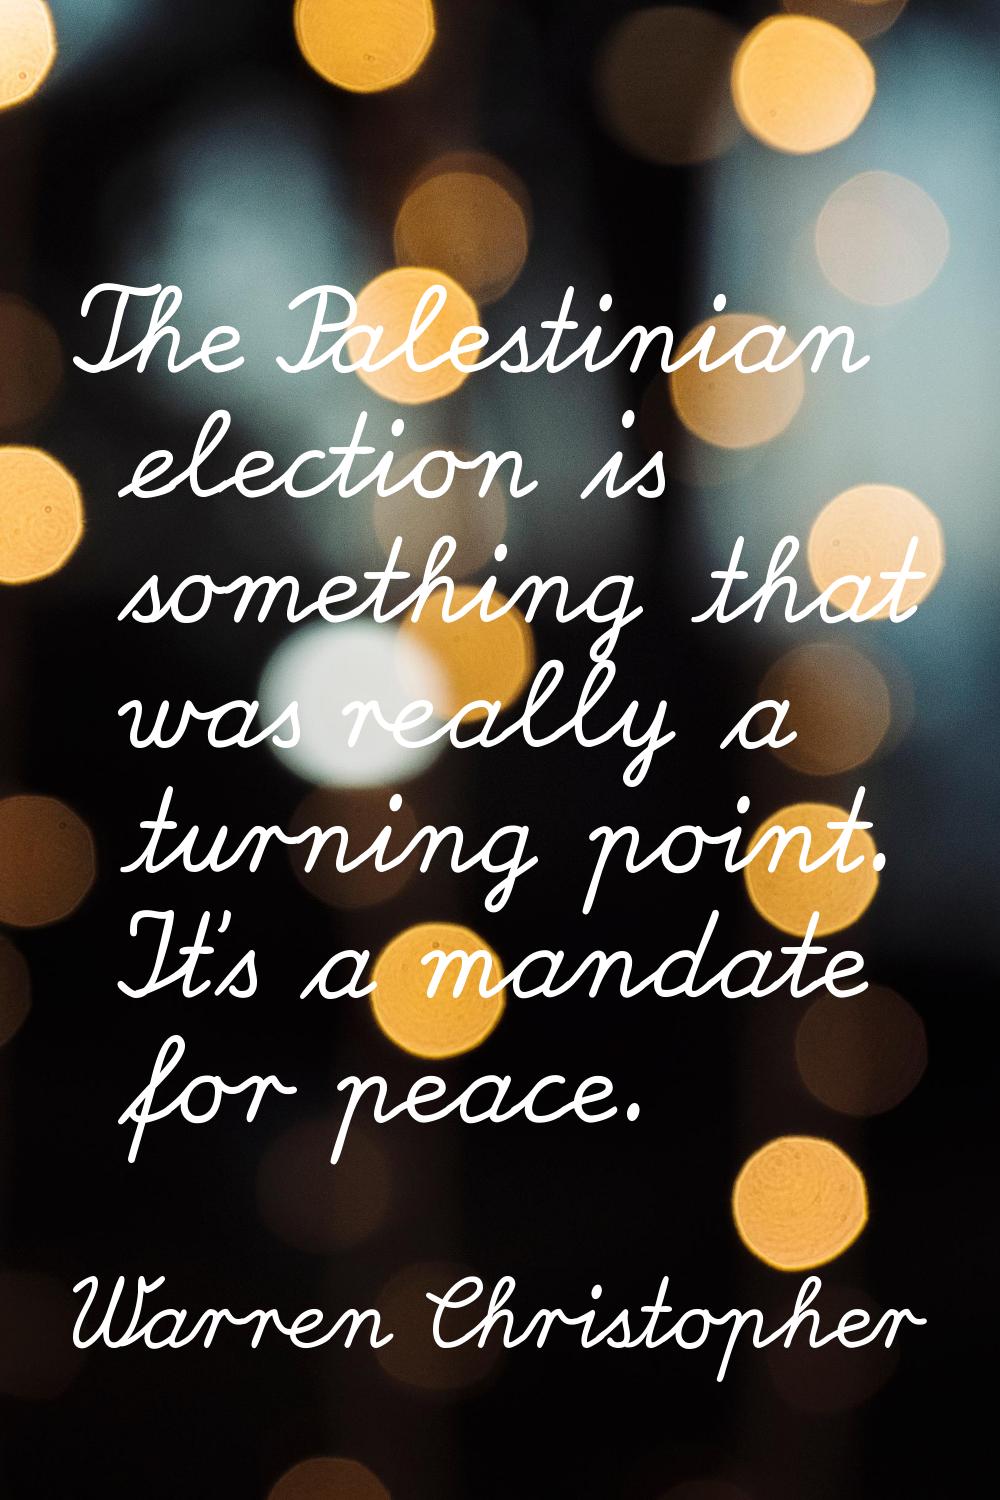 The Palestinian election is something that was really a turning point. It's a mandate for peace.